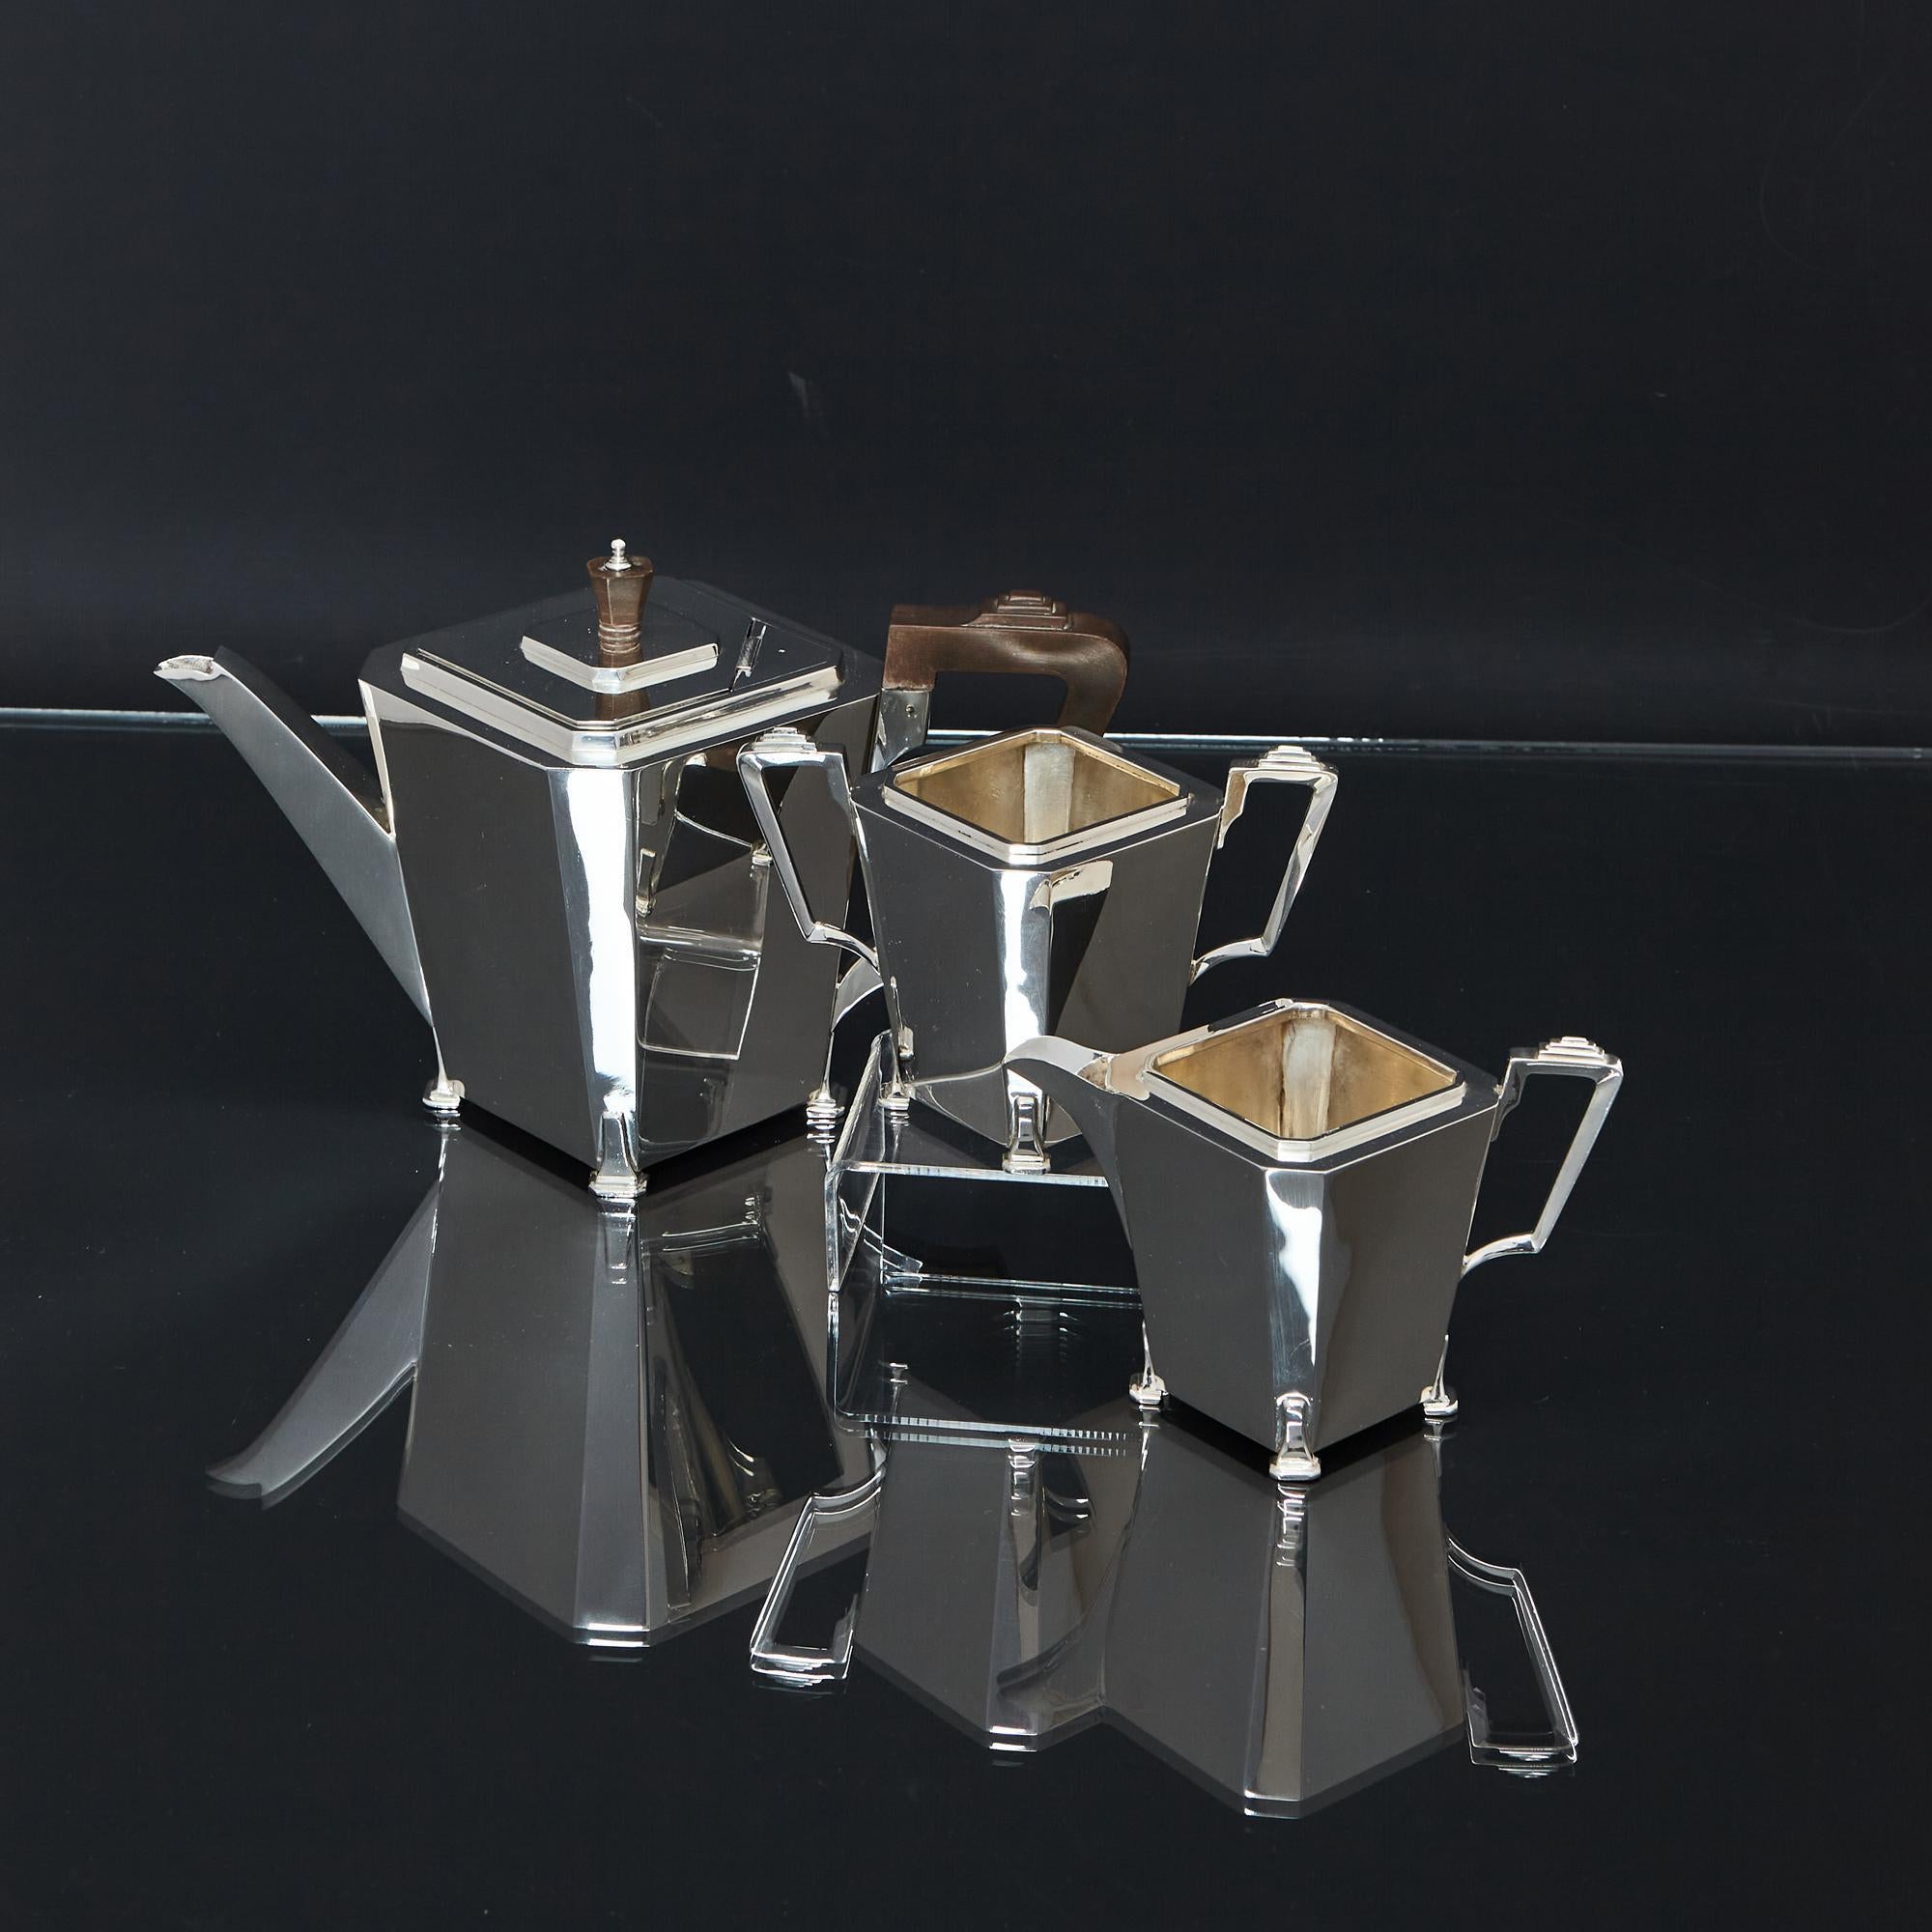 Very stylish three-piece Art Deco silver tea set with typical sleek lines of the era. All pieces of this handmade silver tea set feature geometric square panelled bodies with cut-corners, with handles on the corners to give a diamond shape. The